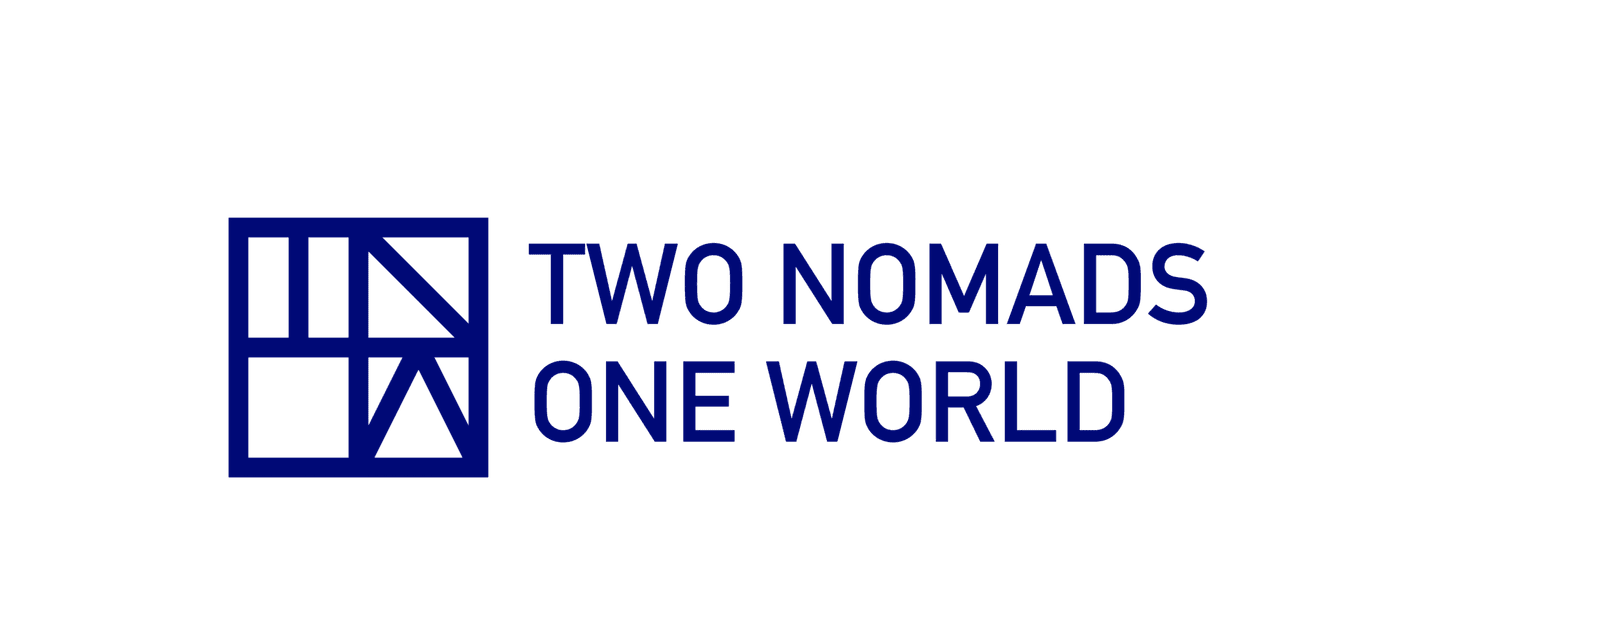 Two Nomads One World | Explore Bosnia and Herzegovina Today! | 2N1W